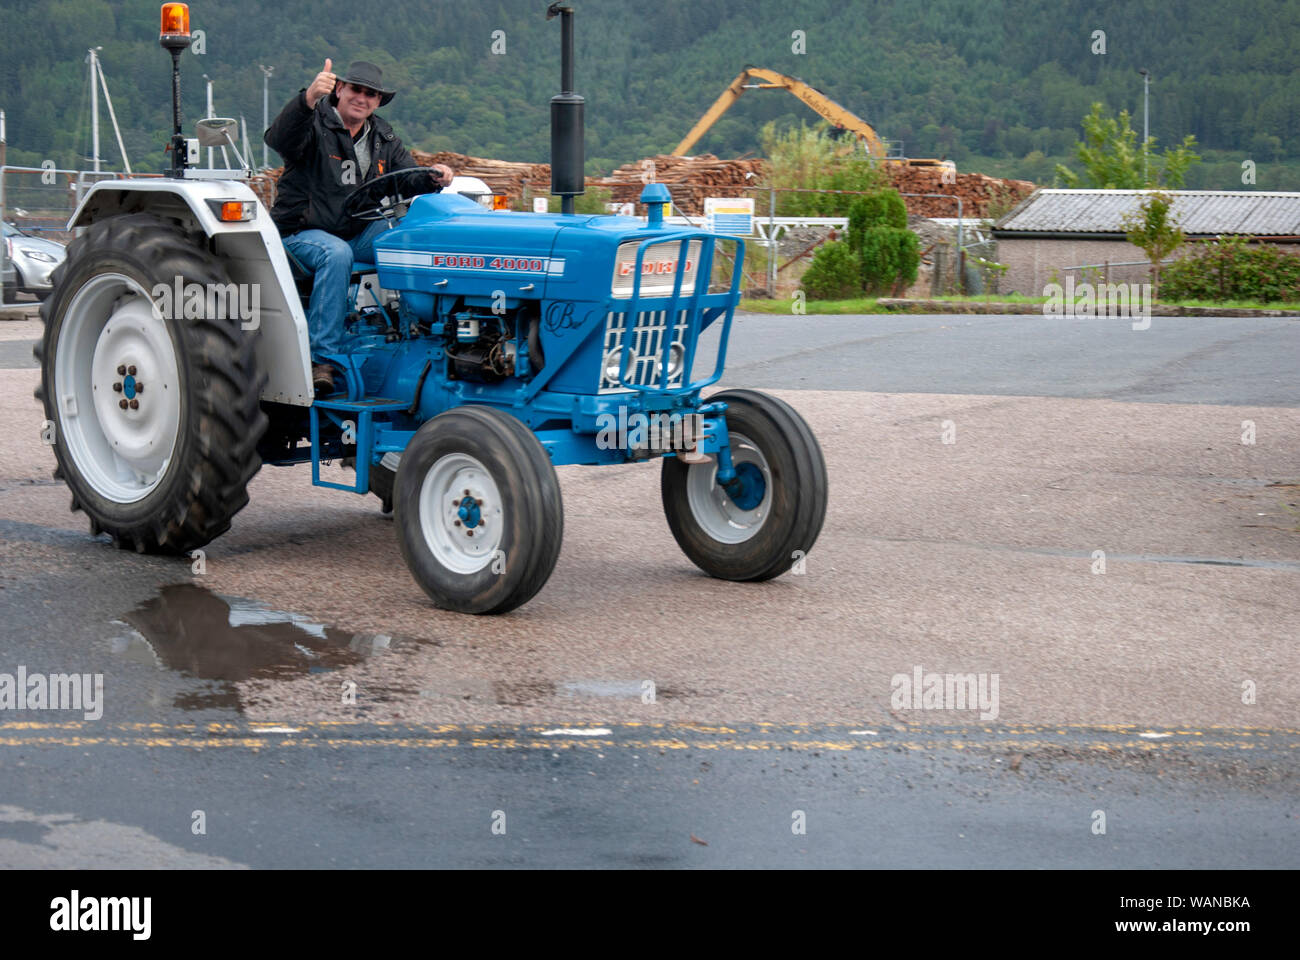 Man Stetson Hat Driving Blue White Ford 4000 Tractor male black jacket thumbs up gleaming front offside drivers side view Holy Loch Marina 1 pers Stock Photo